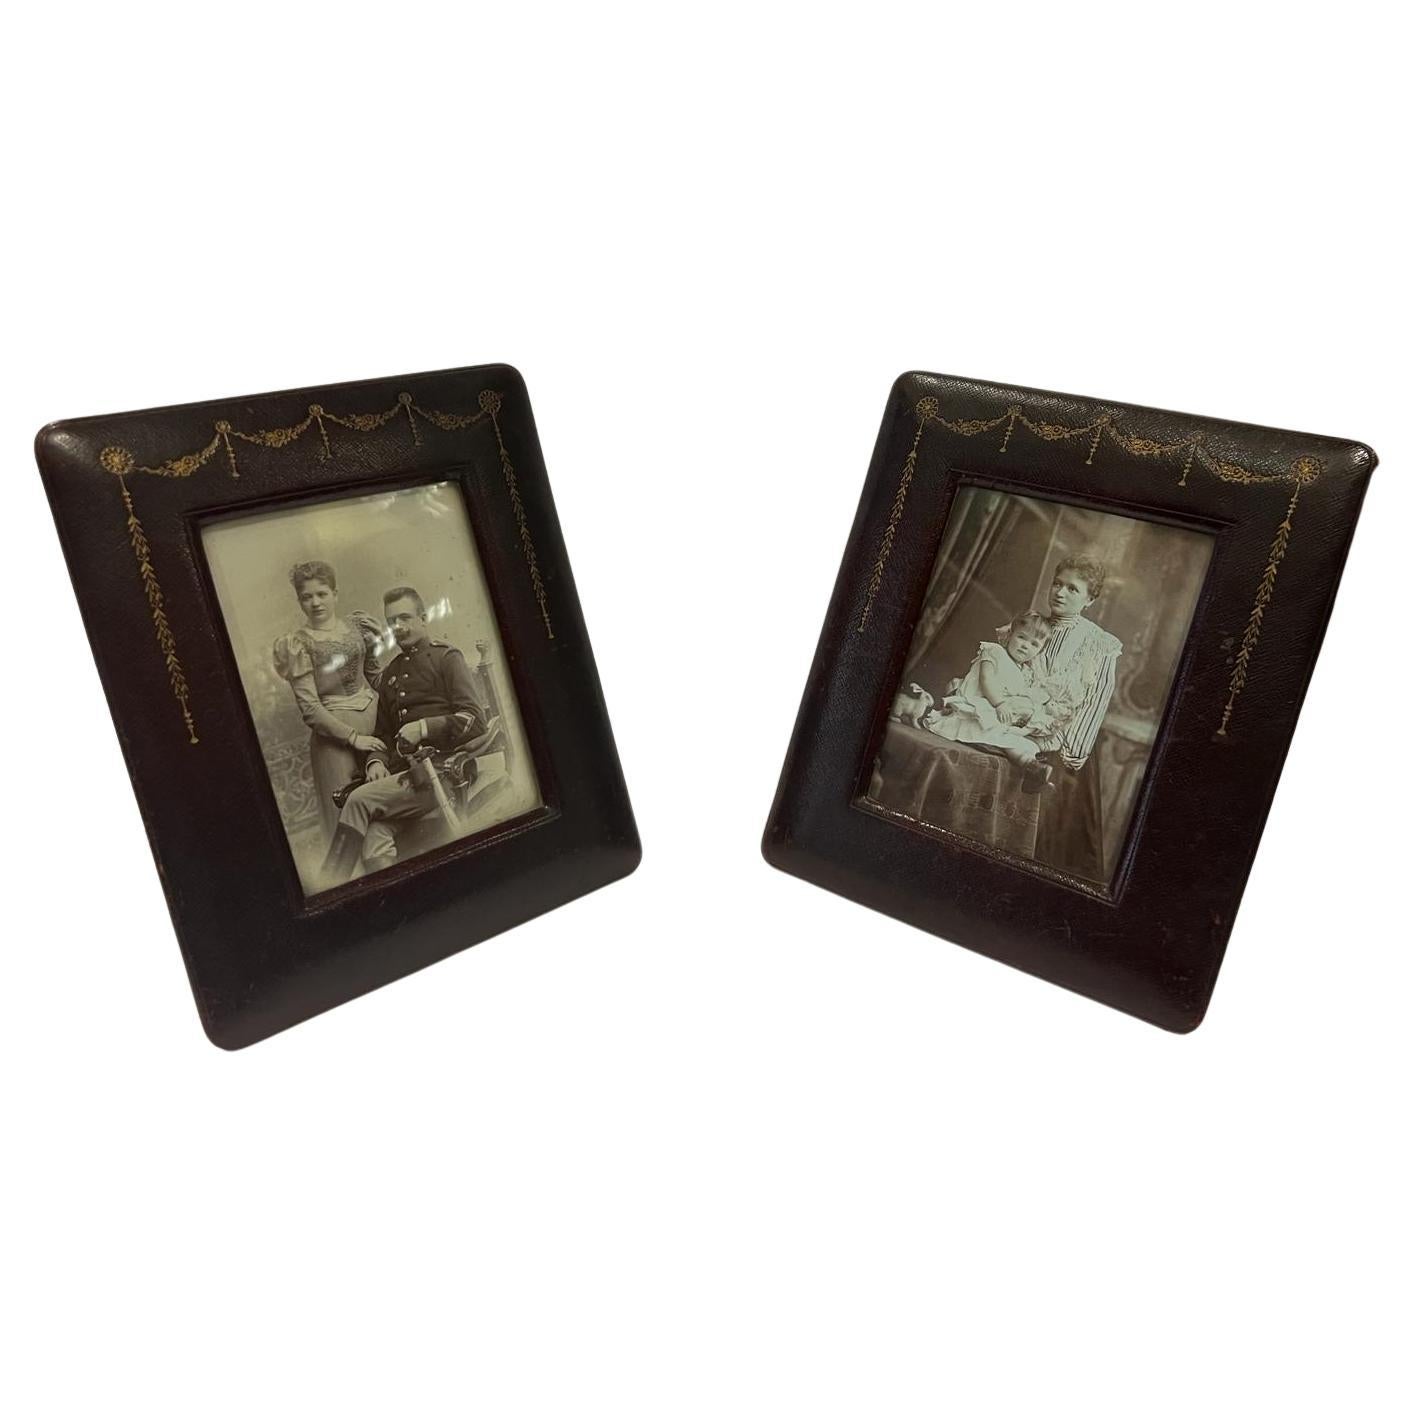 Austria art nouveau picture frame made of leather For Sale